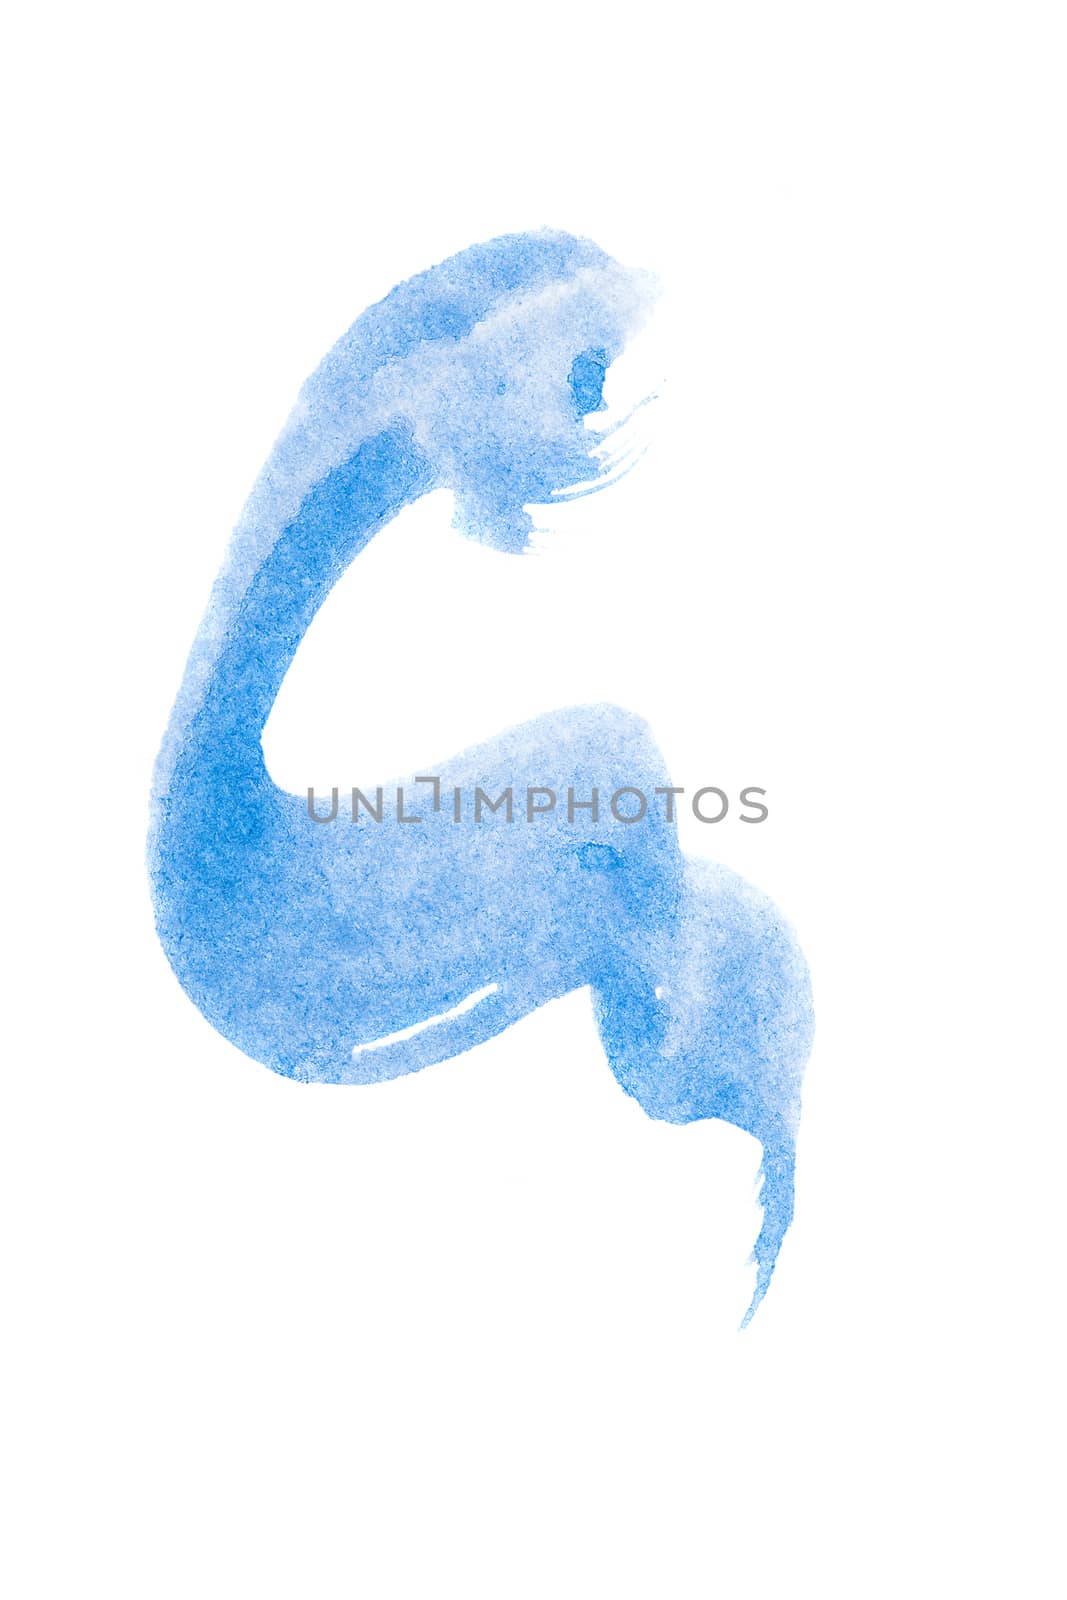 painted with a brush paint, isolated on white background, blue pattern